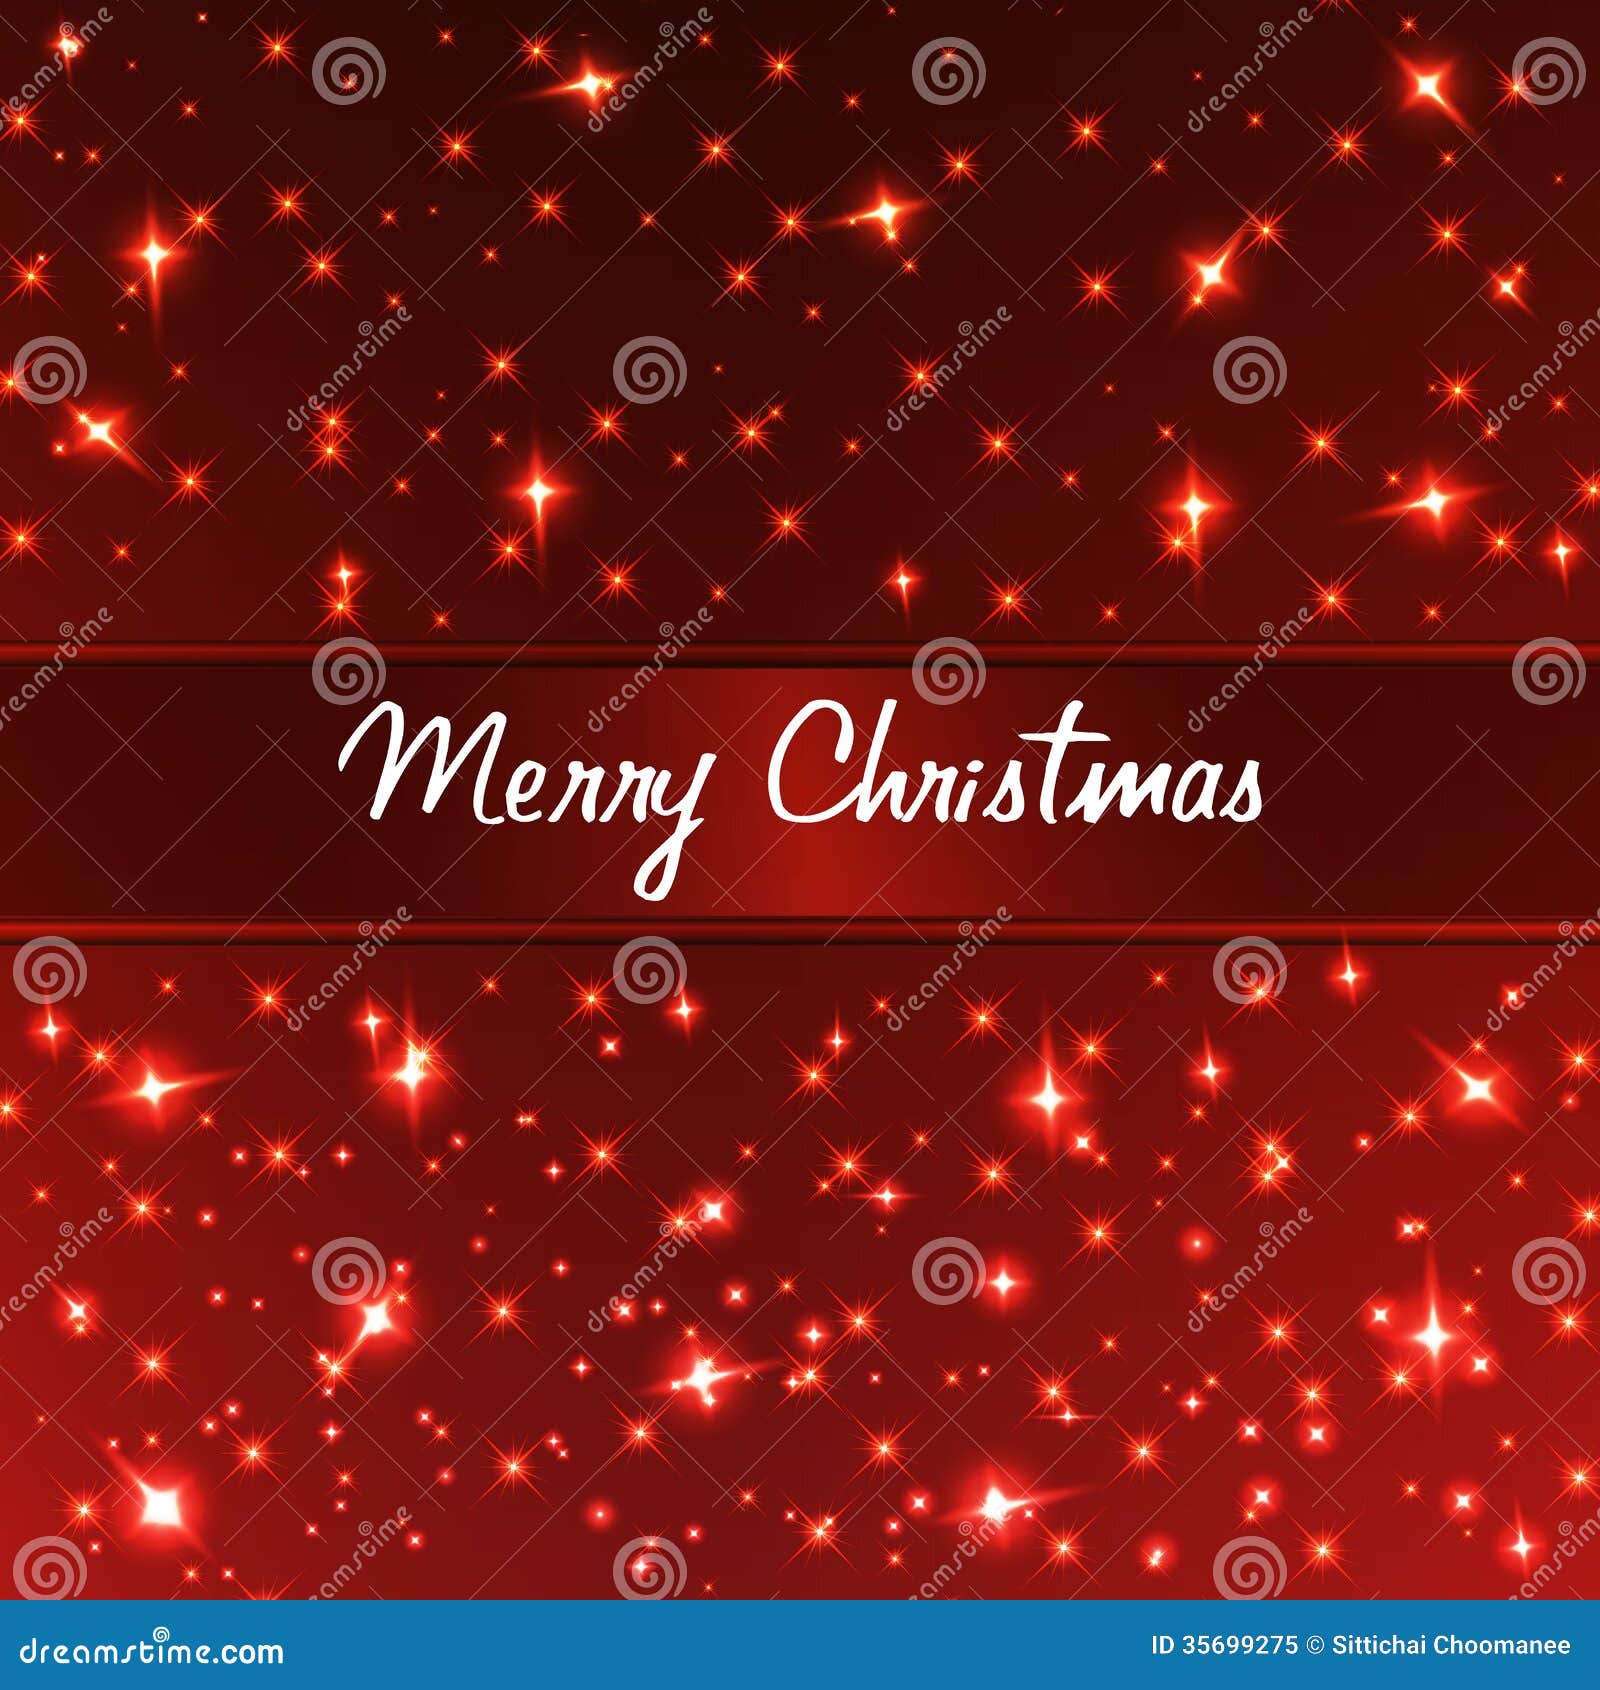 Merry christmas desktop with luxury backgrounds.